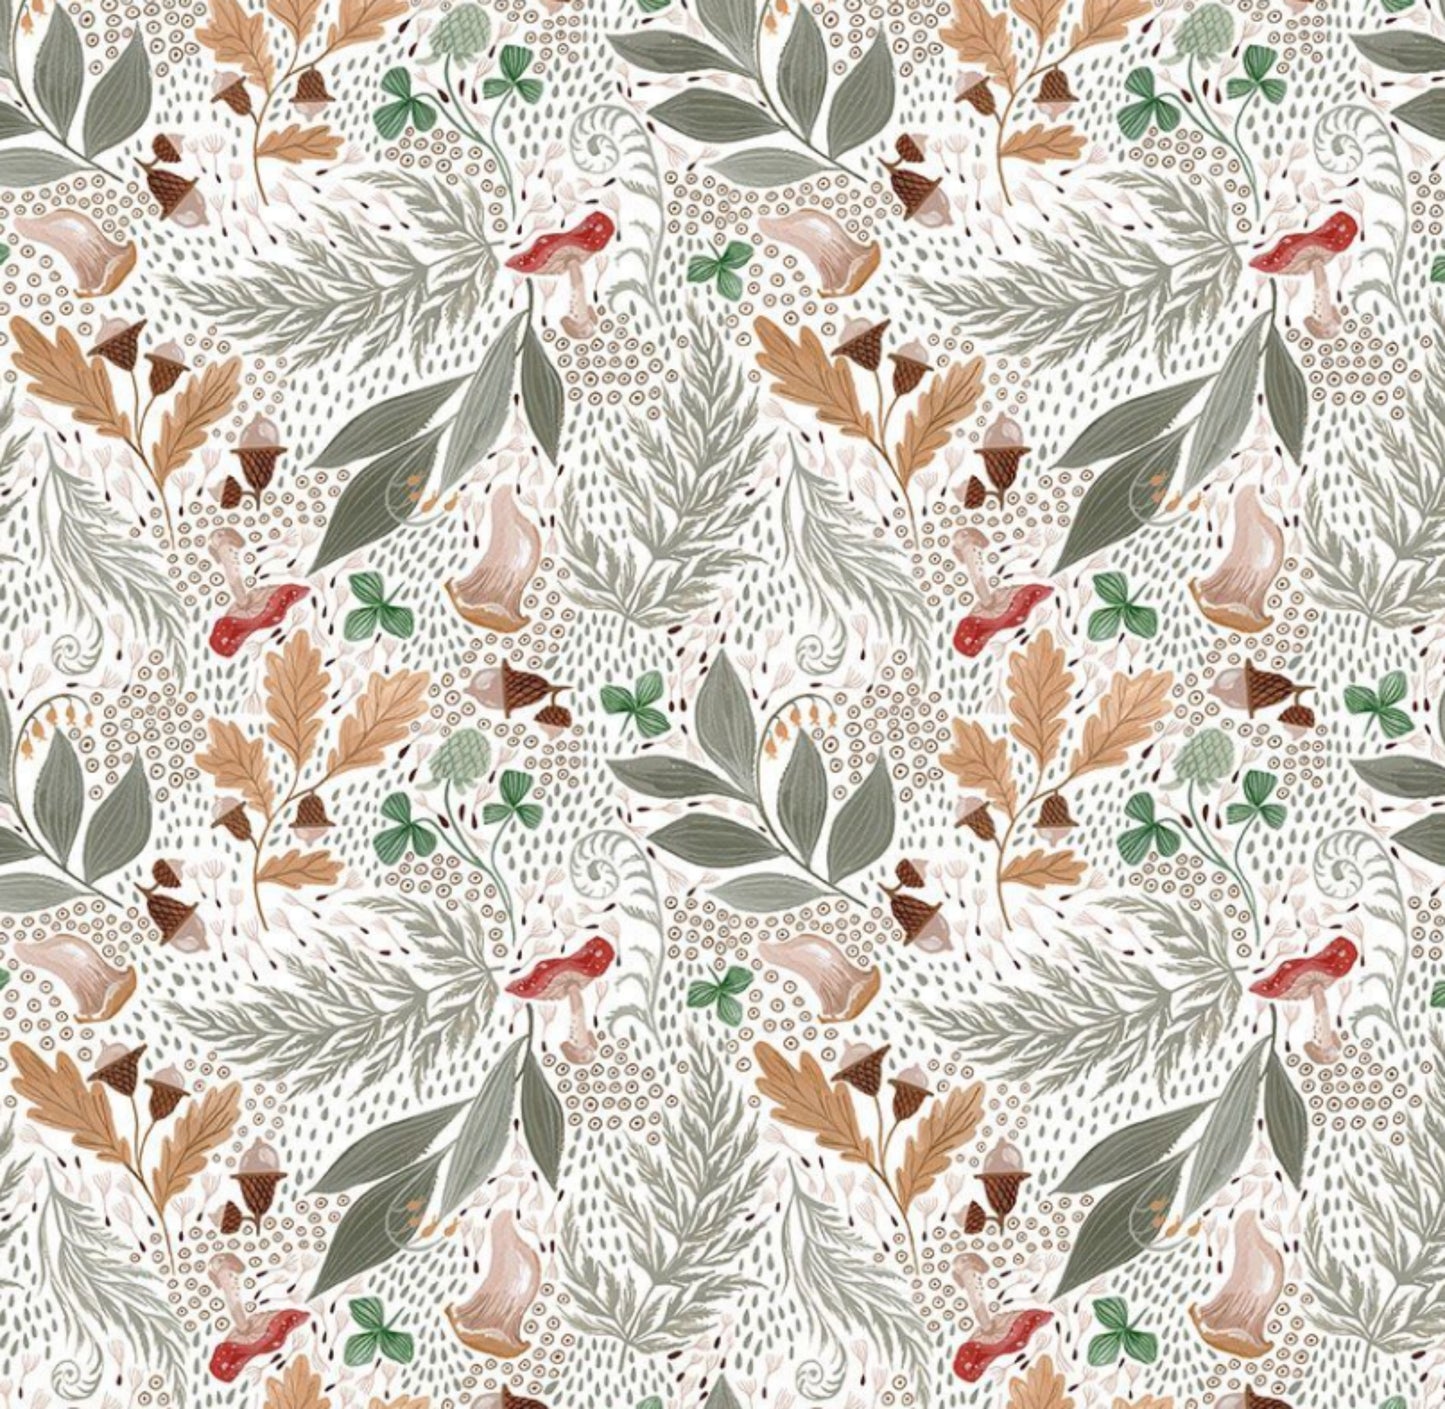 Mystic Floral from the Goblincore Collection by Rae Ritchie for Dear Stella Fabrics